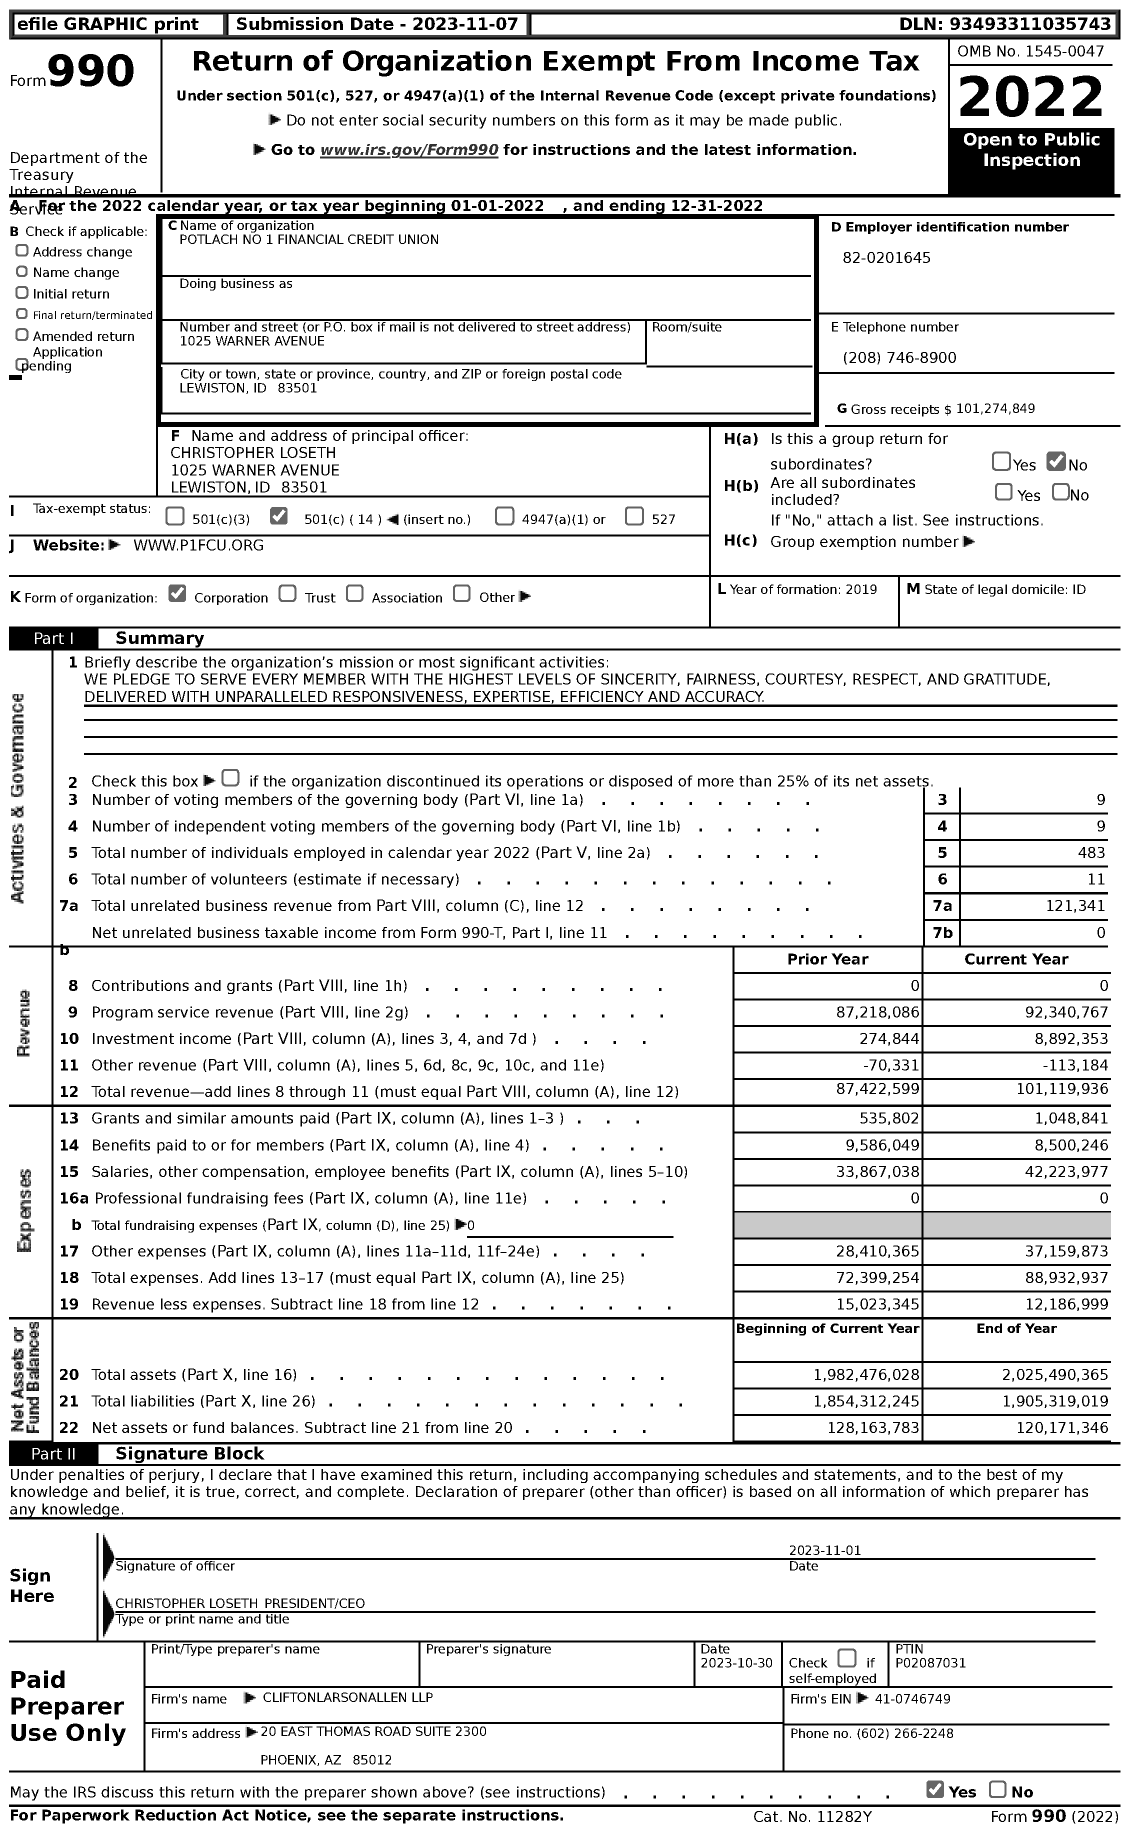 Image of first page of 2022 Form 990 for Potlach No 1 Financial Credit Union